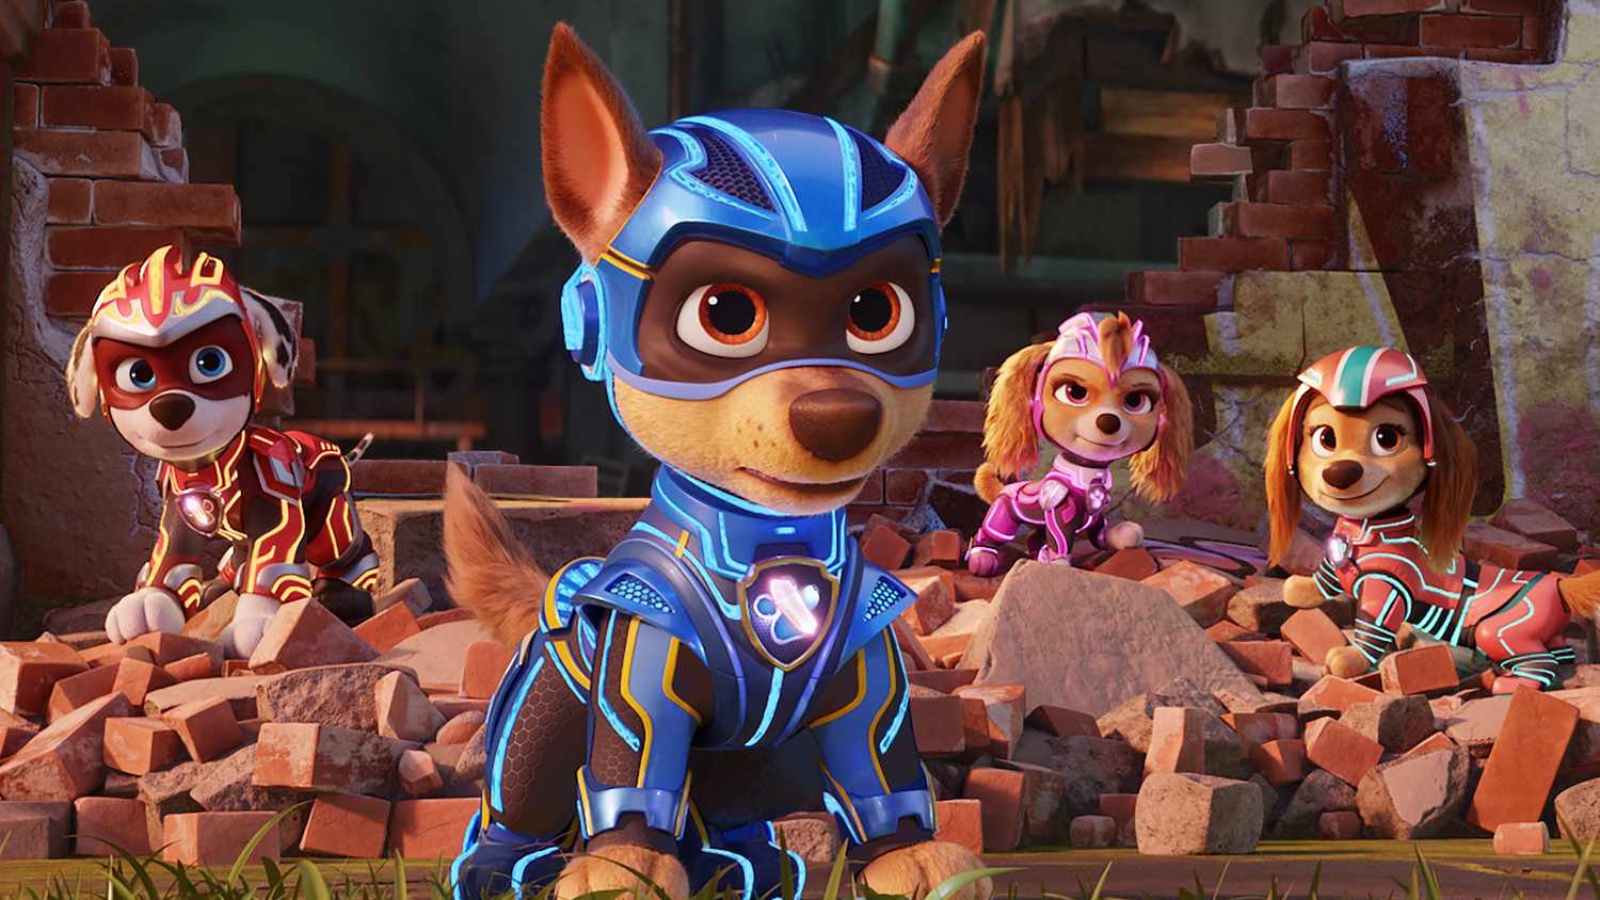 Nickelodeon PAW Patrol: Puppy Power! - Book Summary & Video, Official  Publisher Page